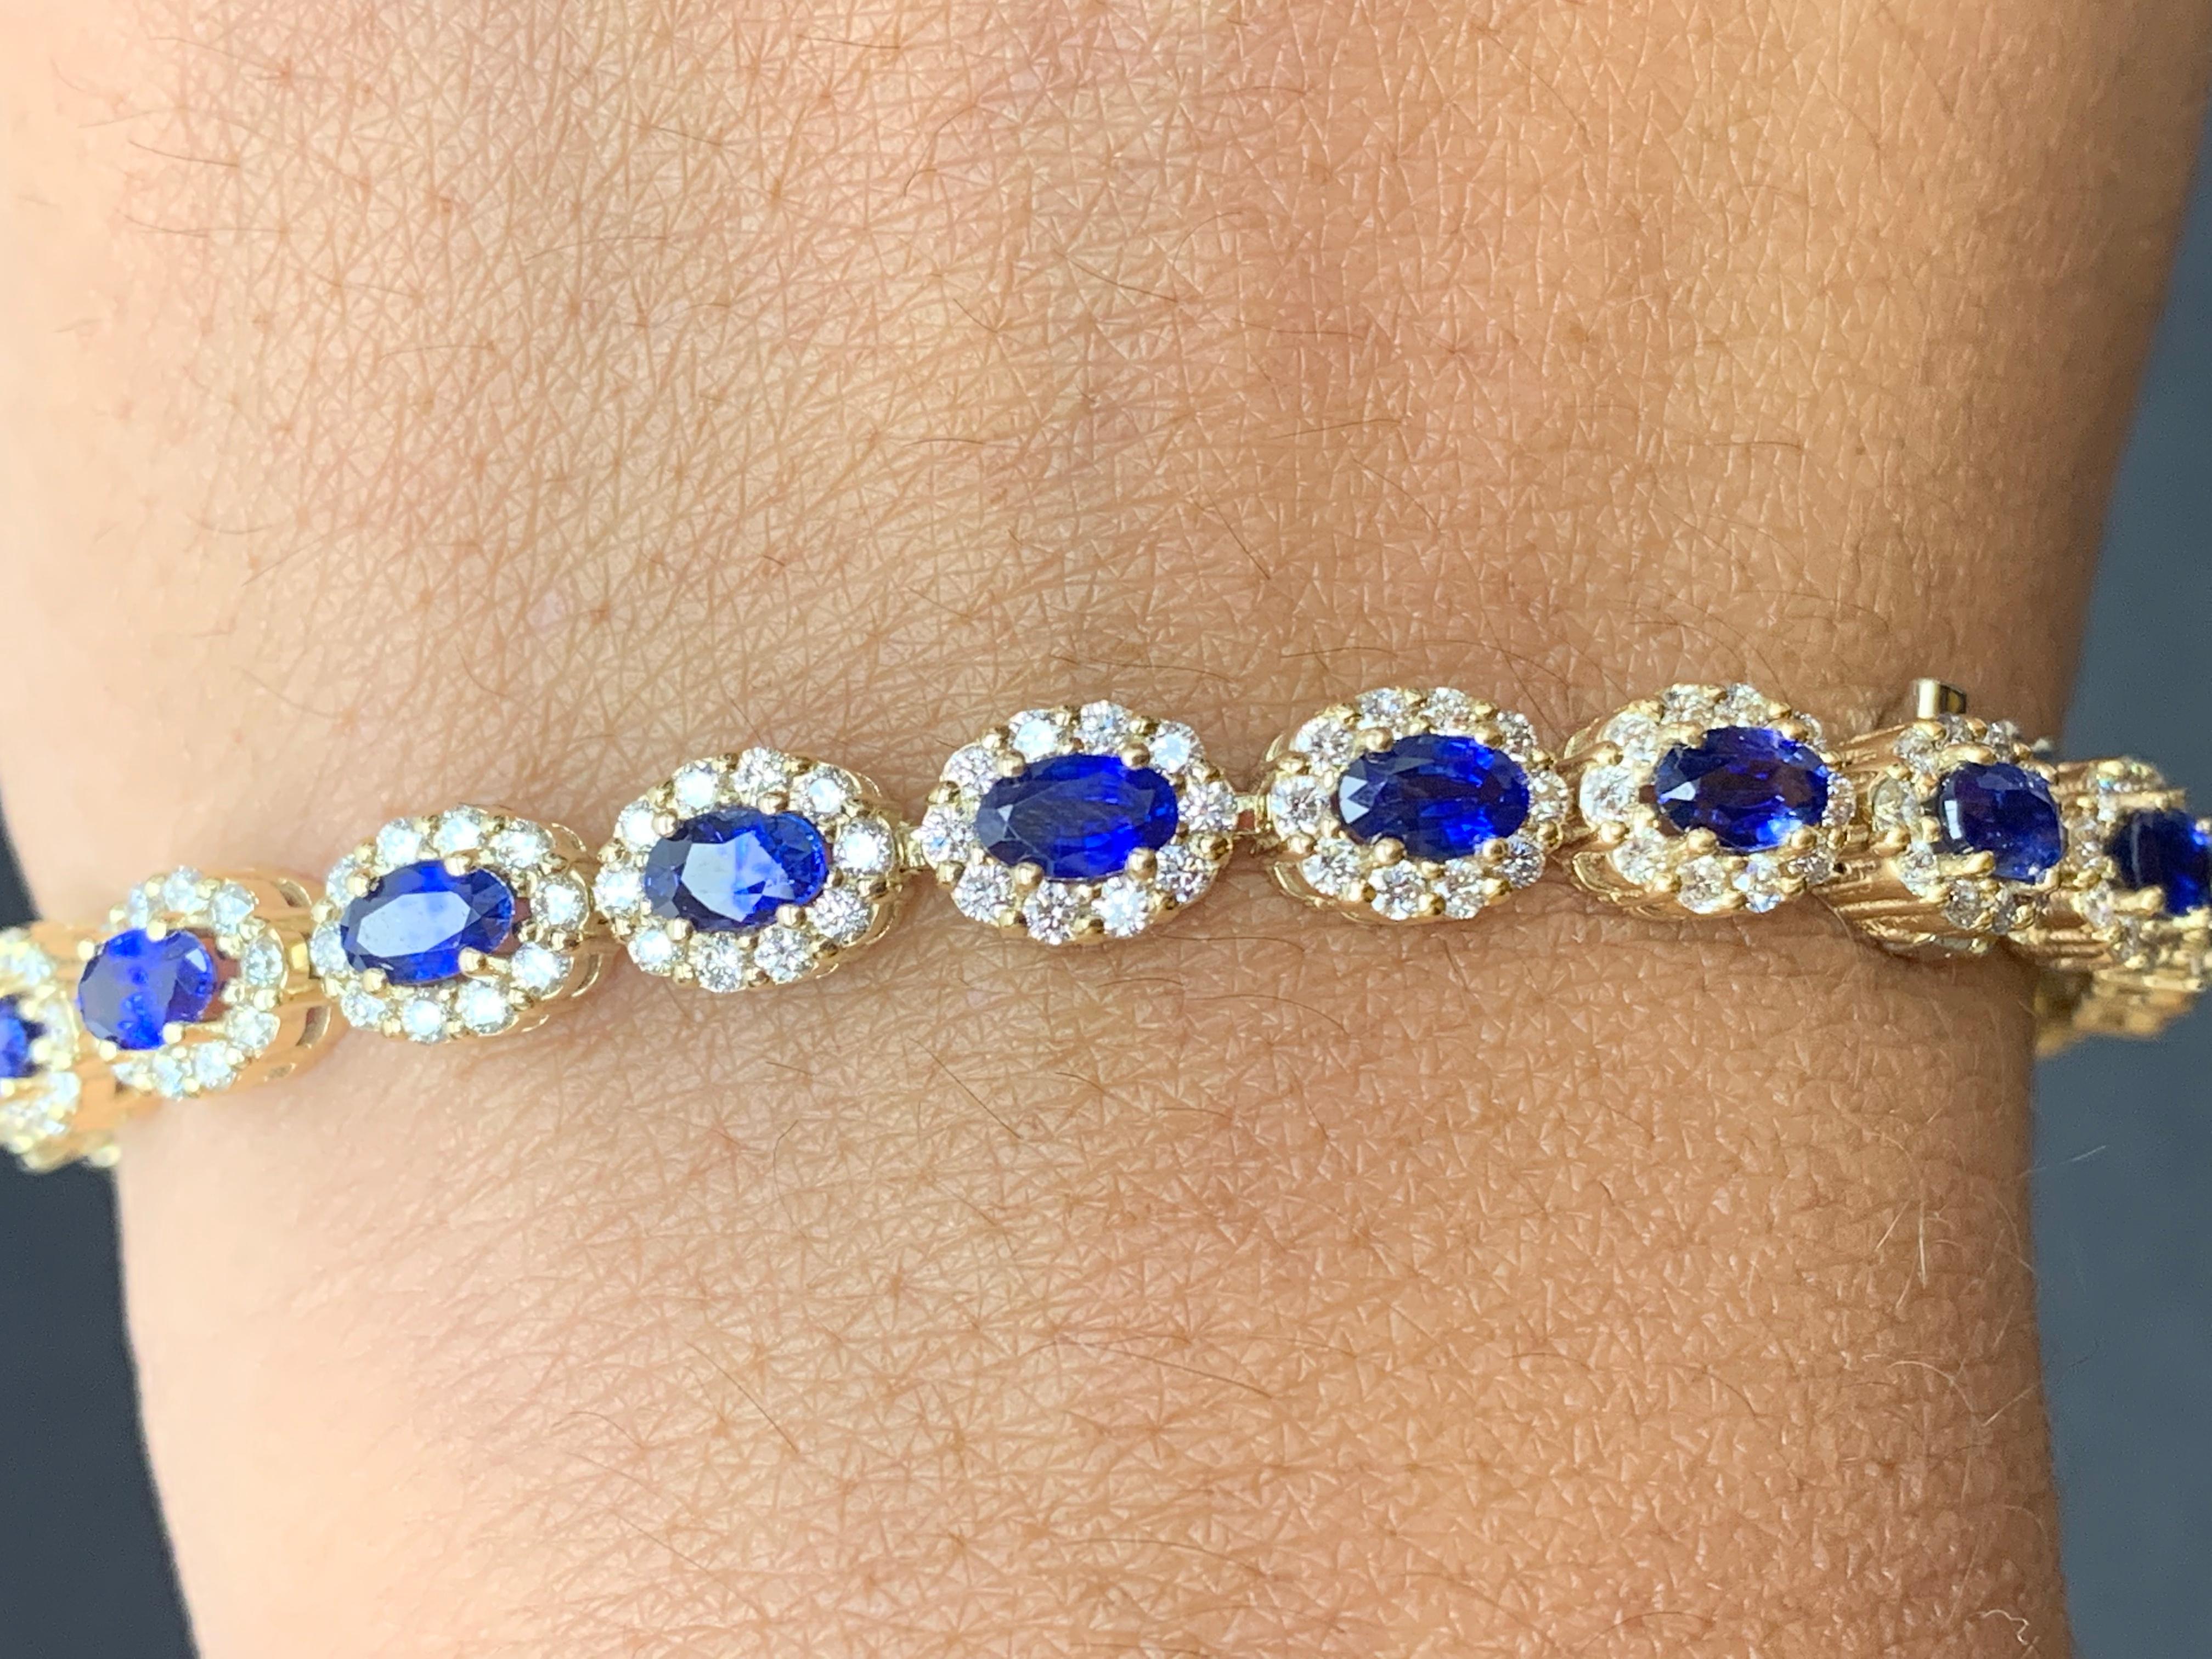 A beautiful Blue Sapphire and diamond bracelet showcasing color-rich blue sapphires, surrounded by a single row of brilliant round diamonds. 22 Oval cut blue sapphires weigh 6.24 carats total; 220 accent diamonds weigh 2.99 carats total.

Style